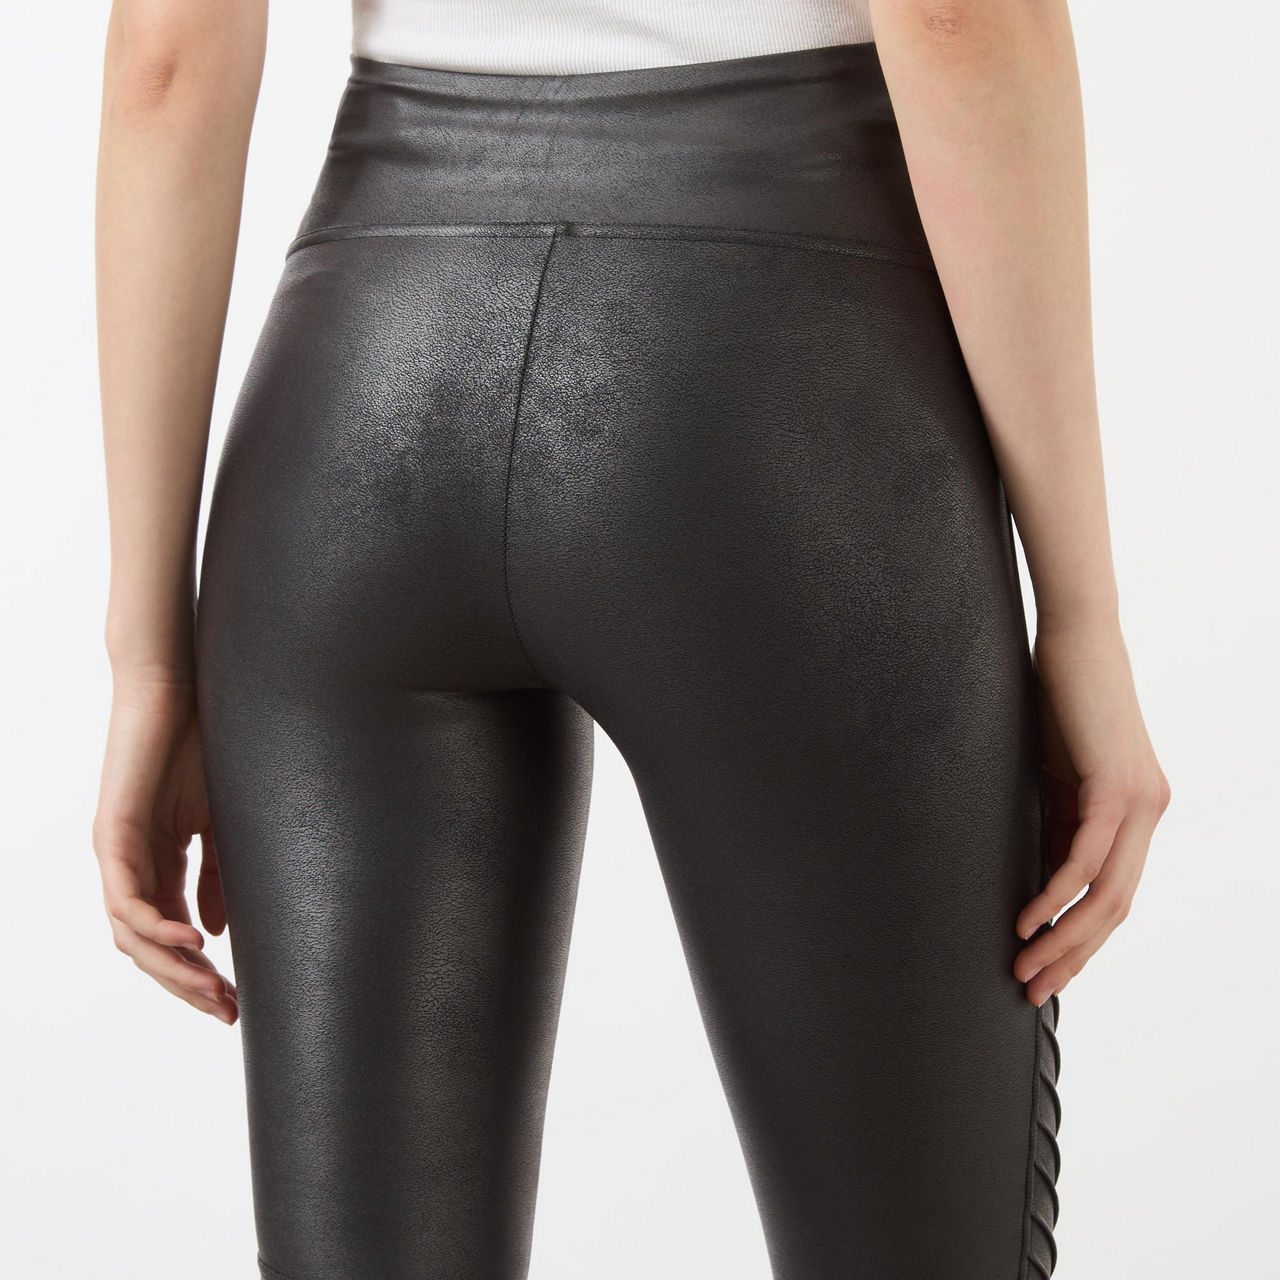 Brown Thomas - The hottest leggings in town, the SPANX Faux Leather Moto  Leggings are back!   /motorbike-leggings/30x5351x20136rveryblk.html